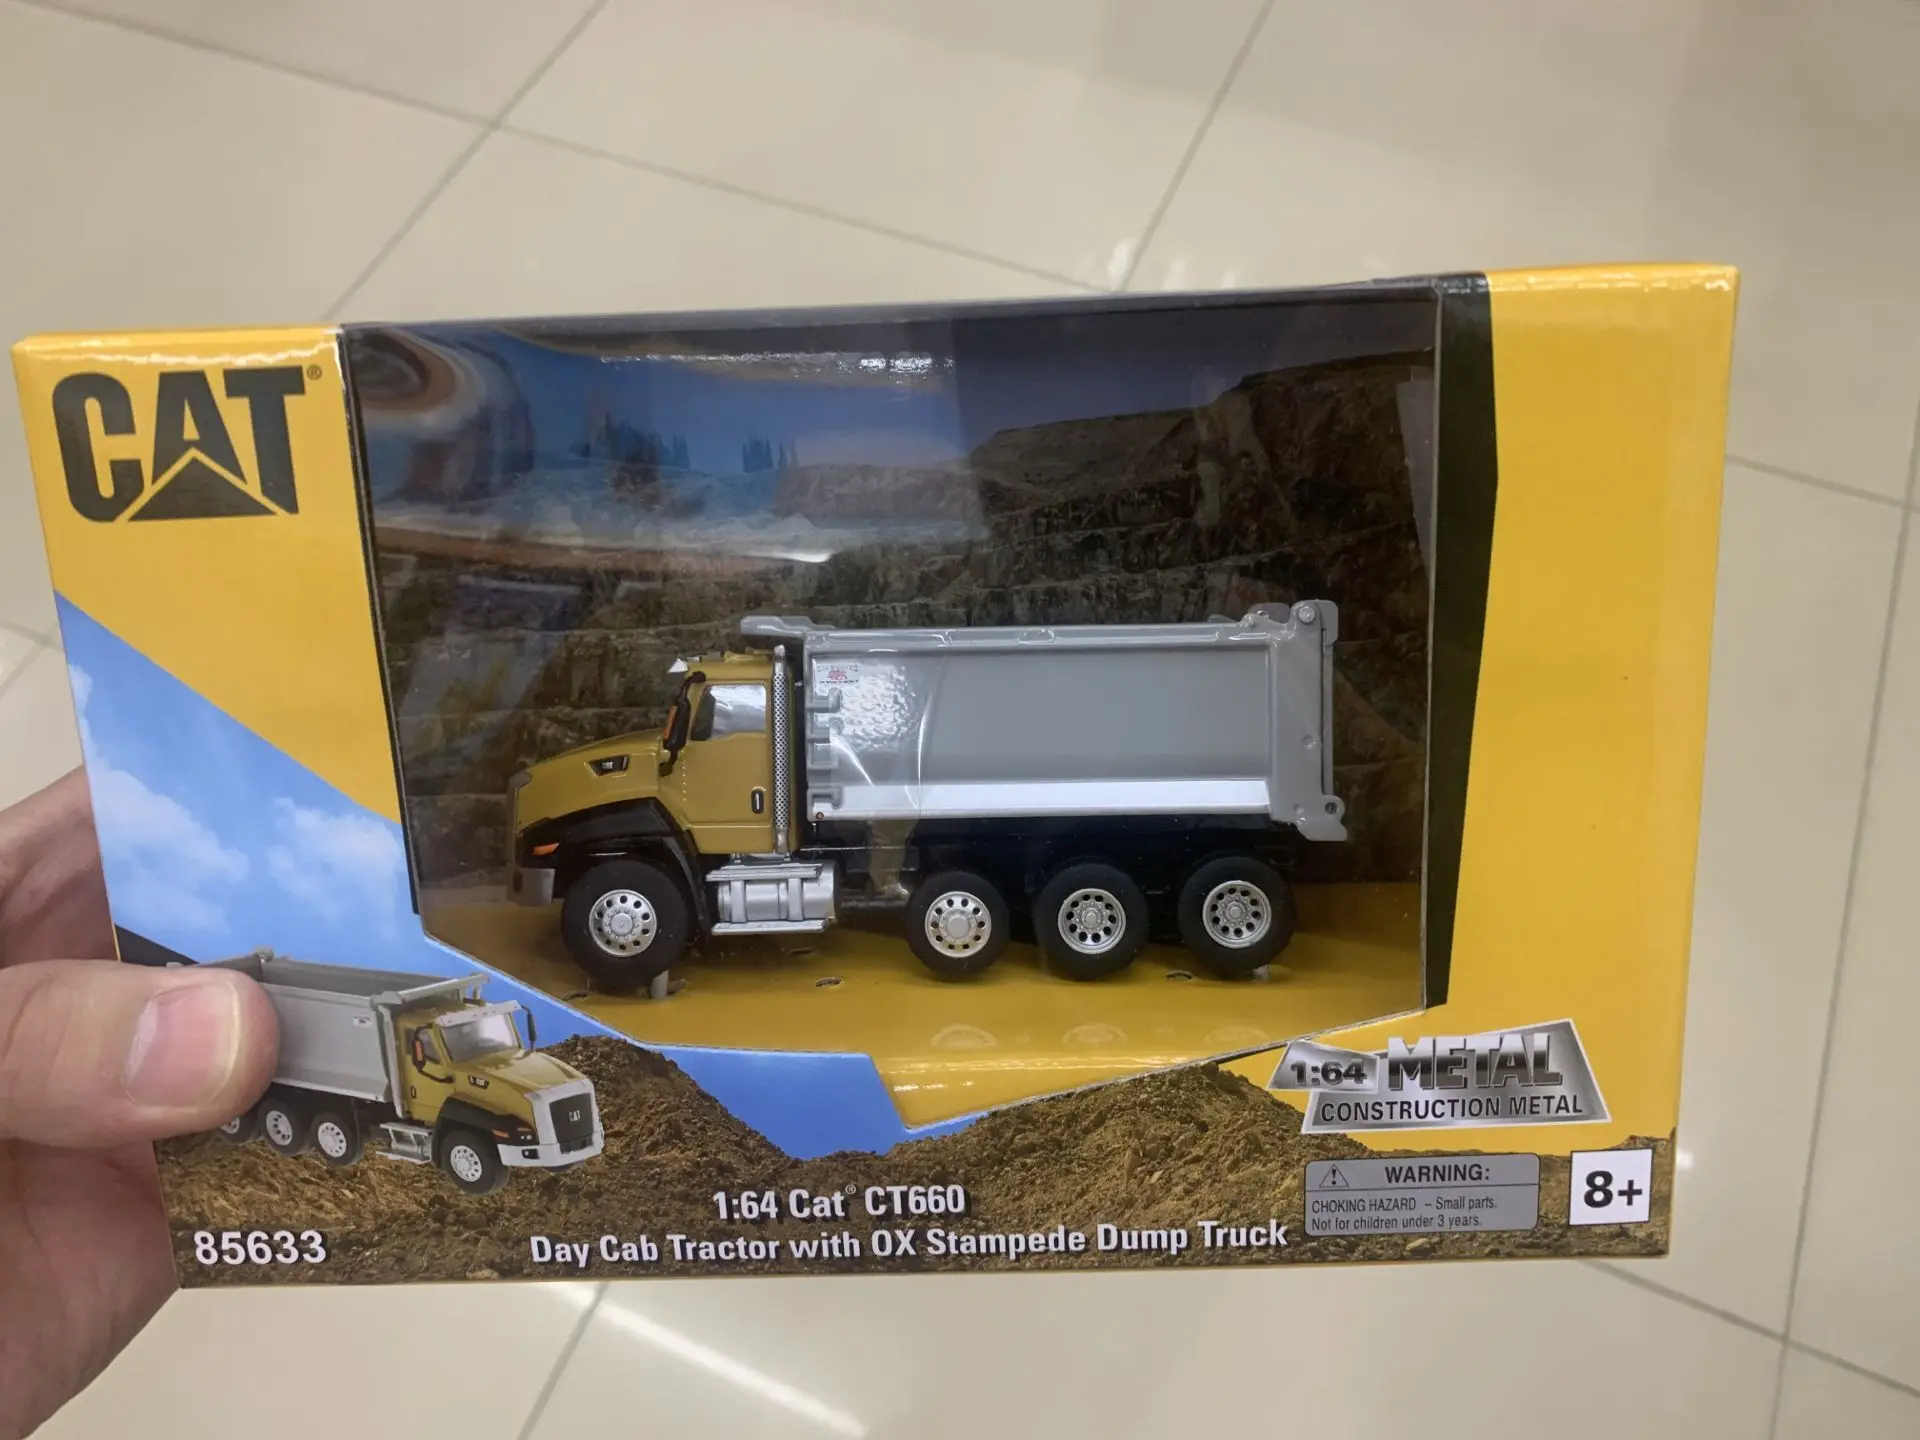 

Caterpillar Cat CT660 Day Cab Tractor With OX Stampede Dump Truck 1/64 Scale DieCast Model DM85633 New in Box